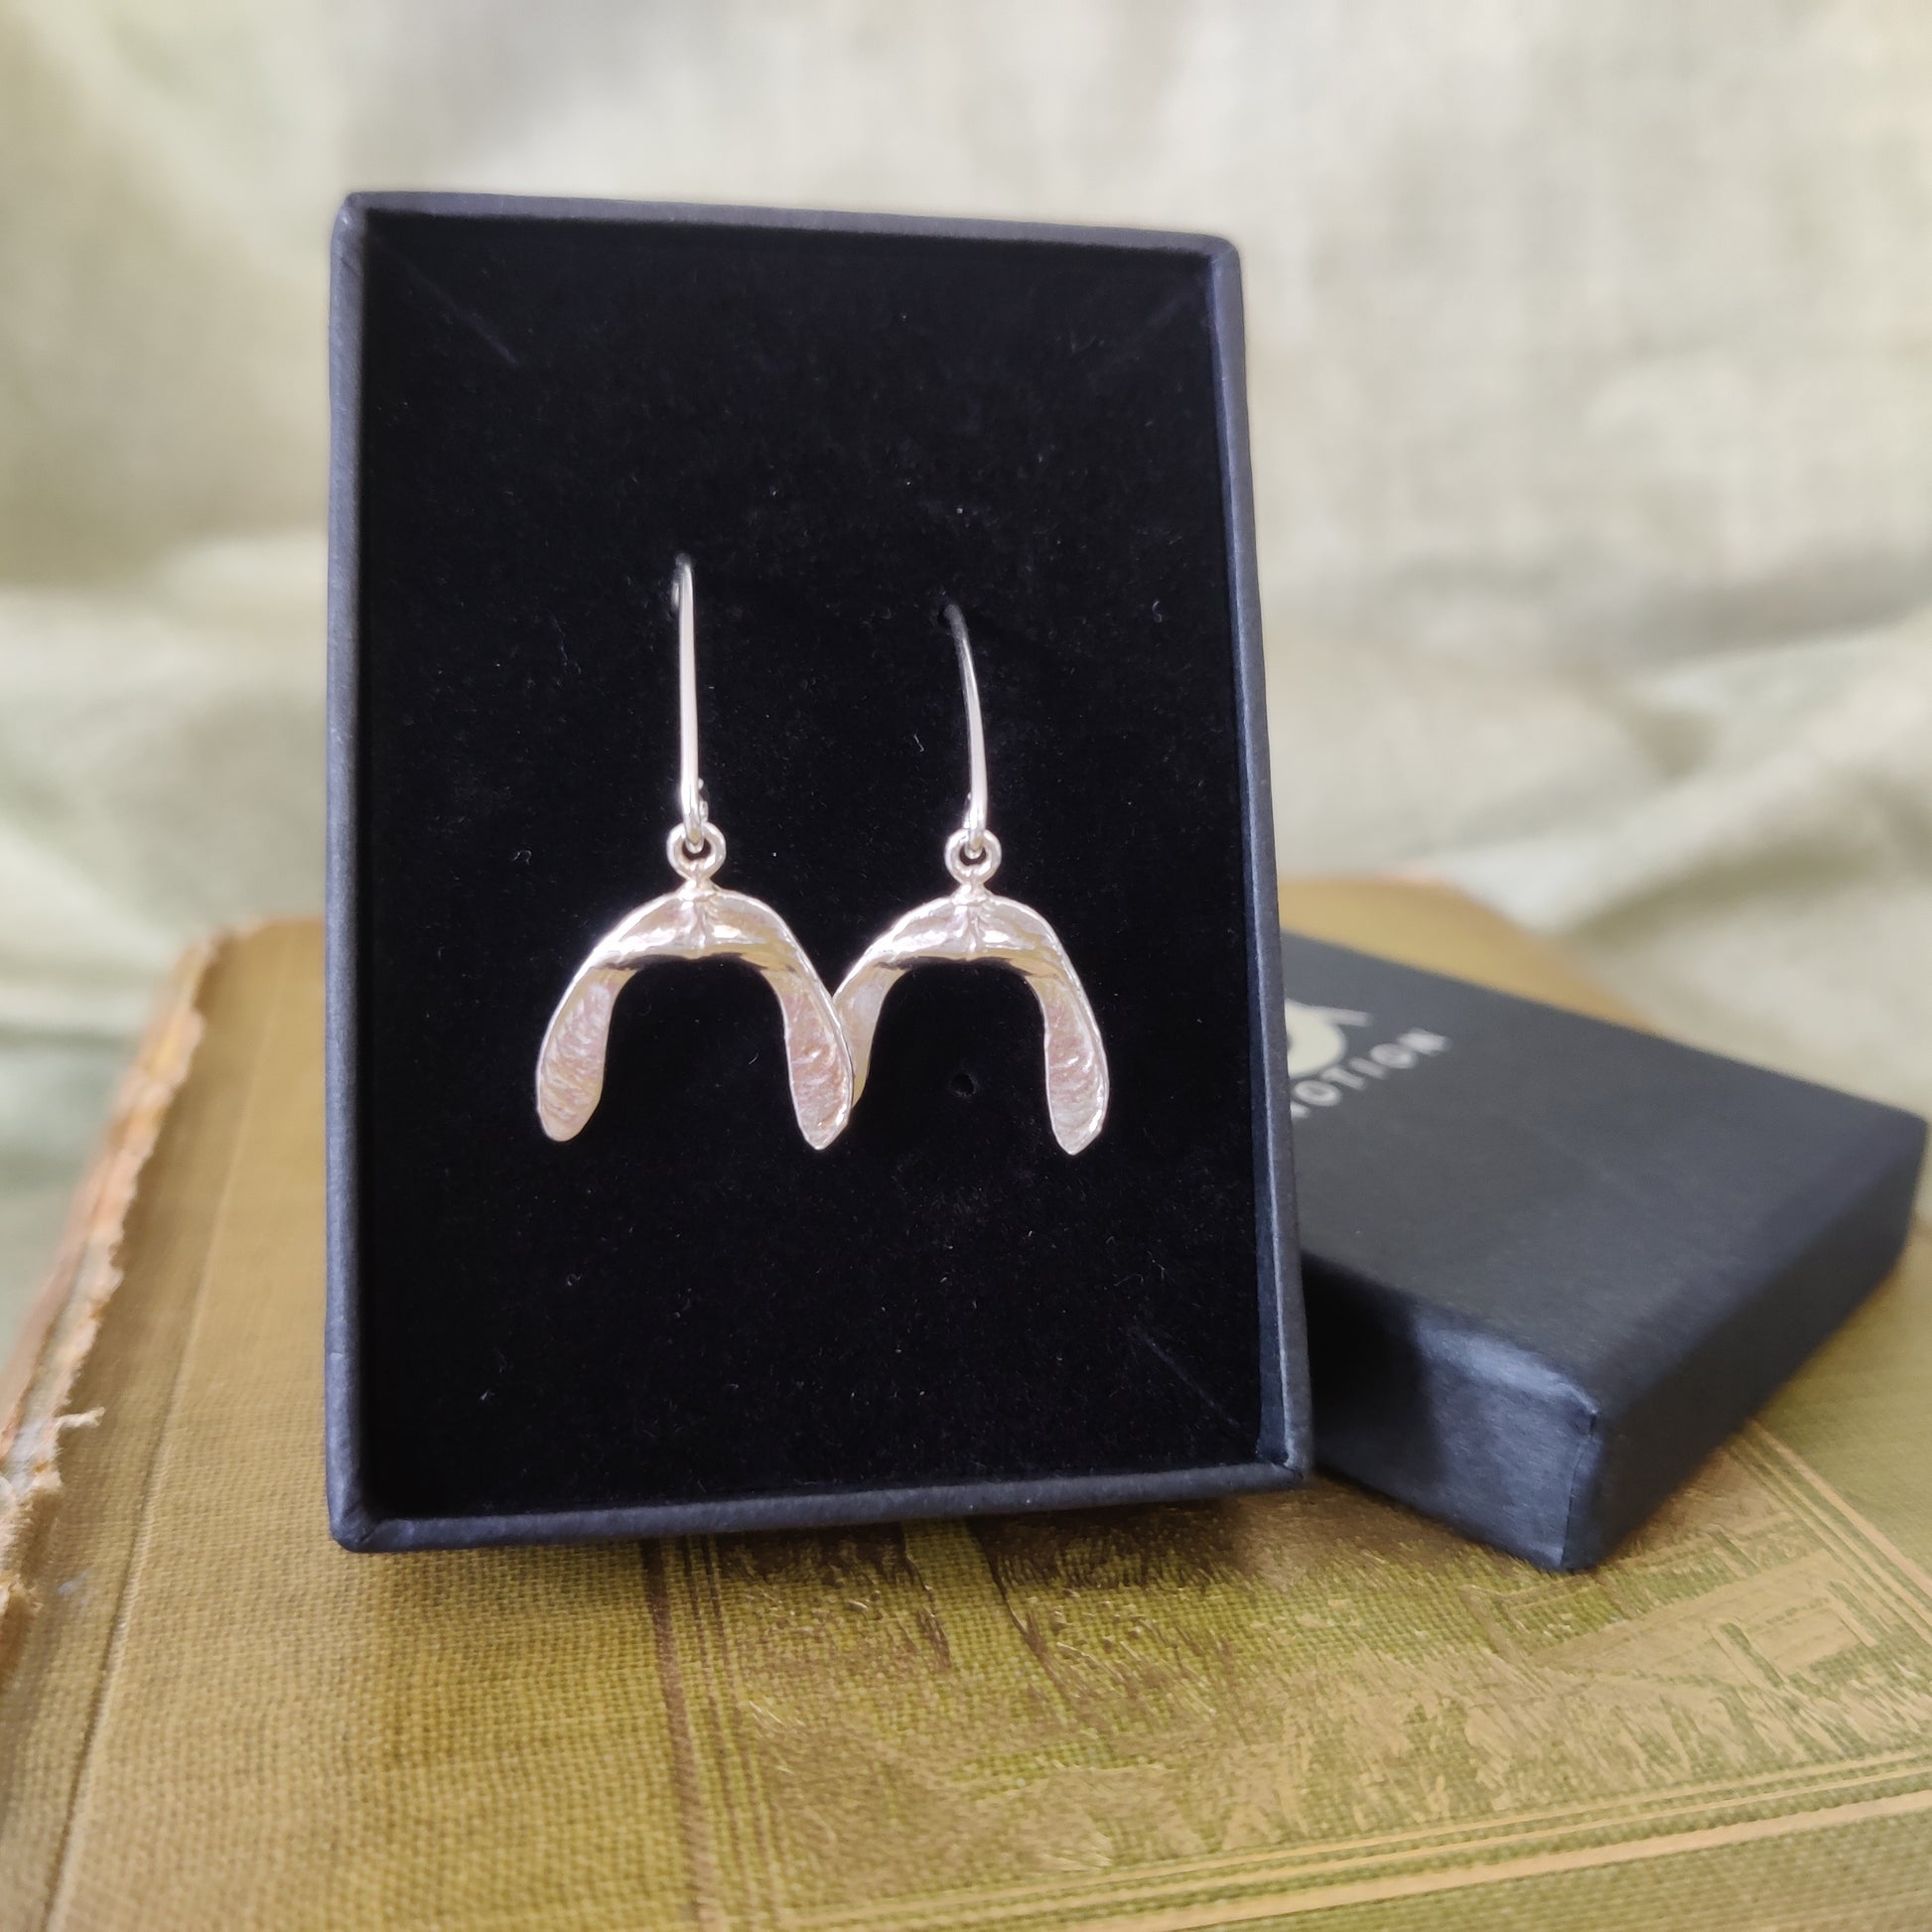 Woodland inspired silver drop earrings in a box